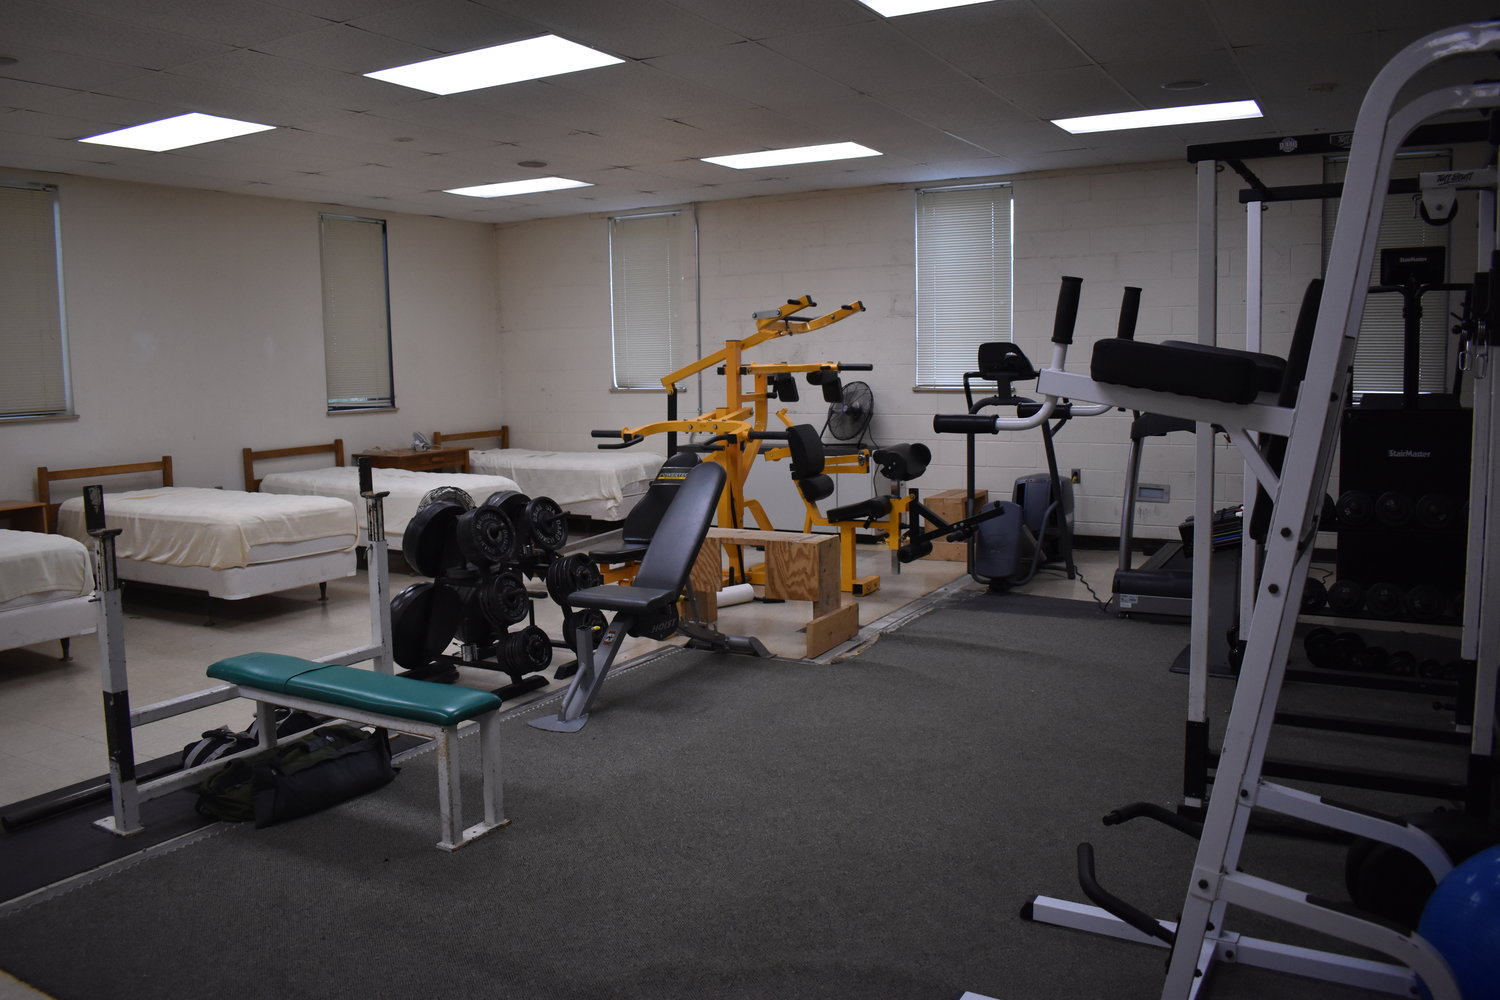 Lansing Mayor Andy Schor's proposal would include funds to improve Fire Department  facilities. This photo shows how sleeping and workout equipment share the same space at one of the city's fire stations.